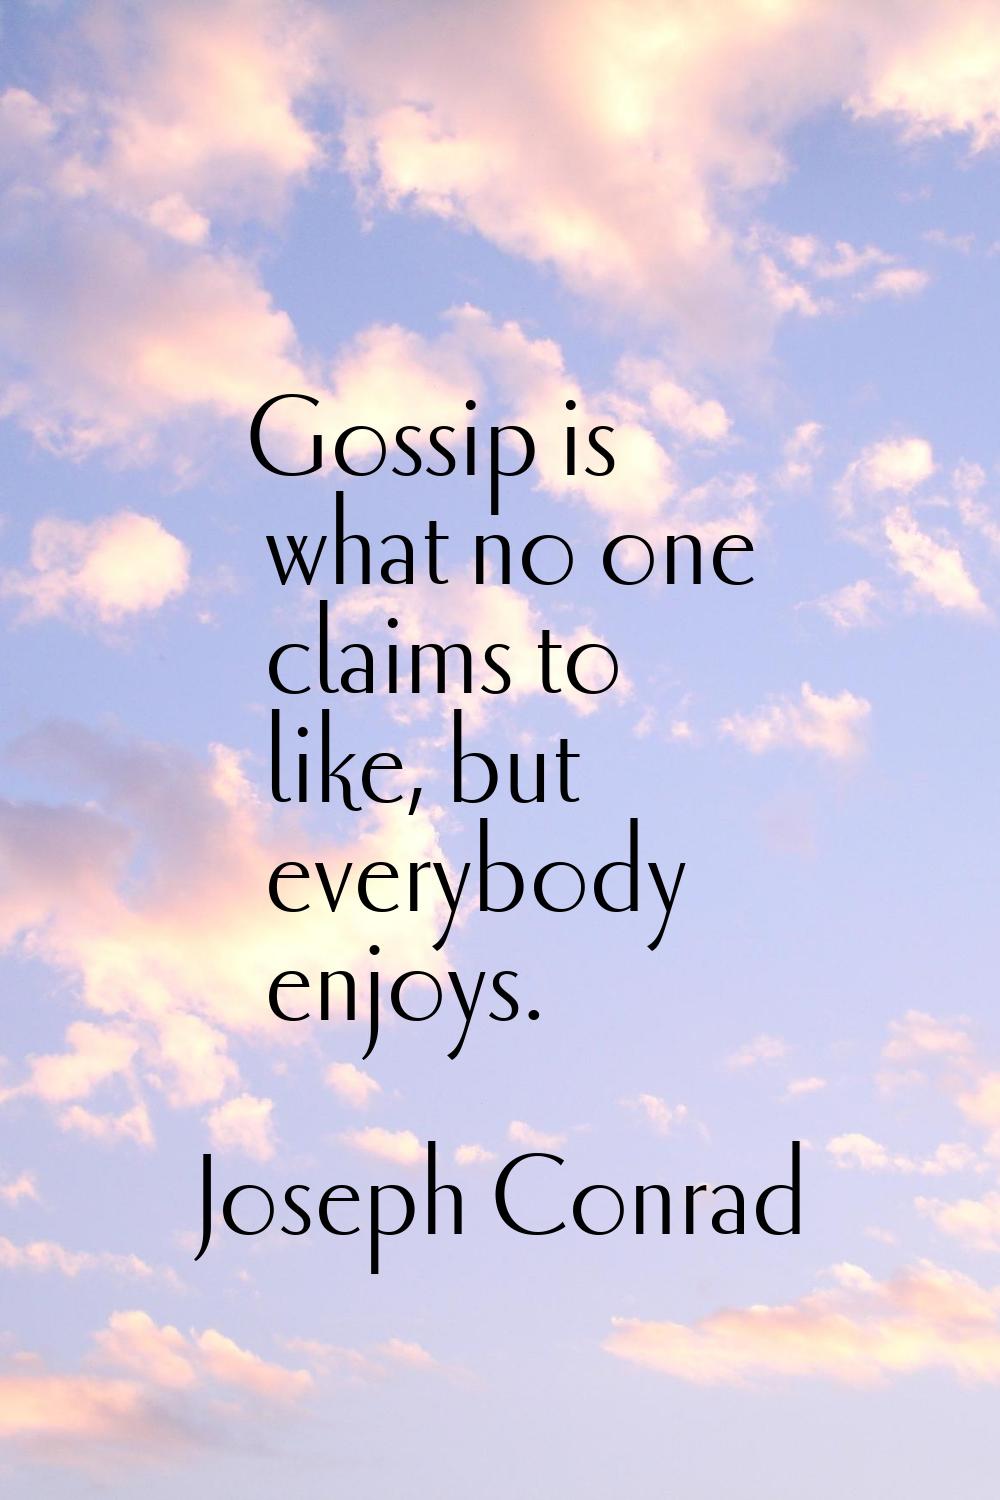 Gossip is what no one claims to like, but everybody enjoys.